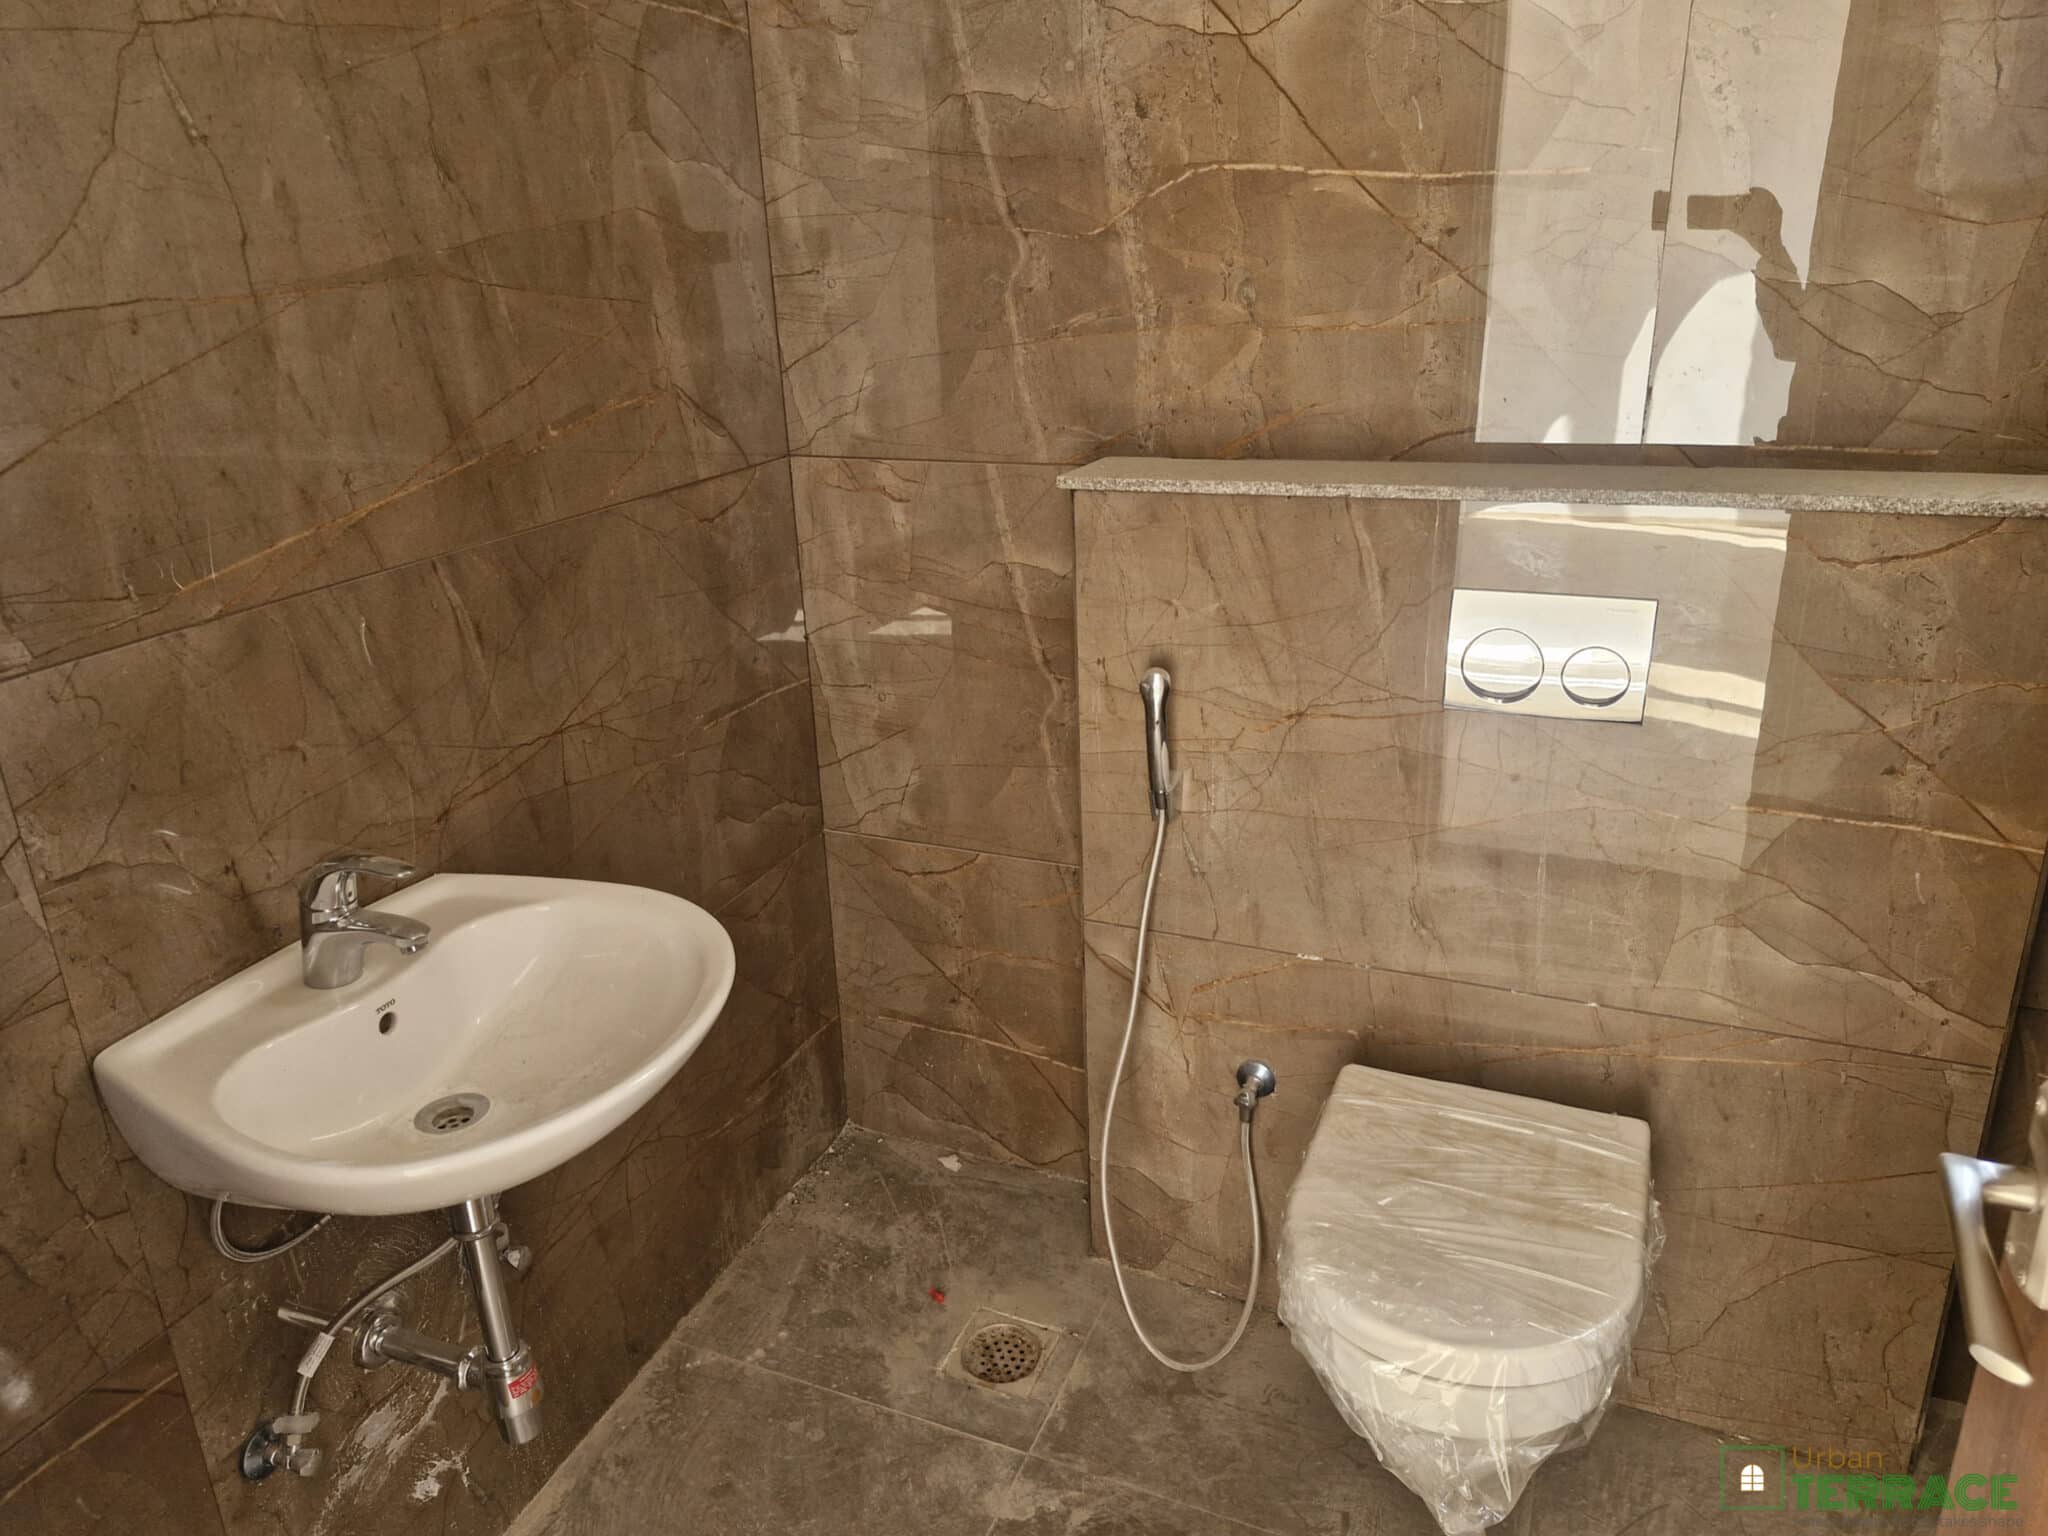 washroom 1 of 4bhk flat for sale at race course road by urban terrace